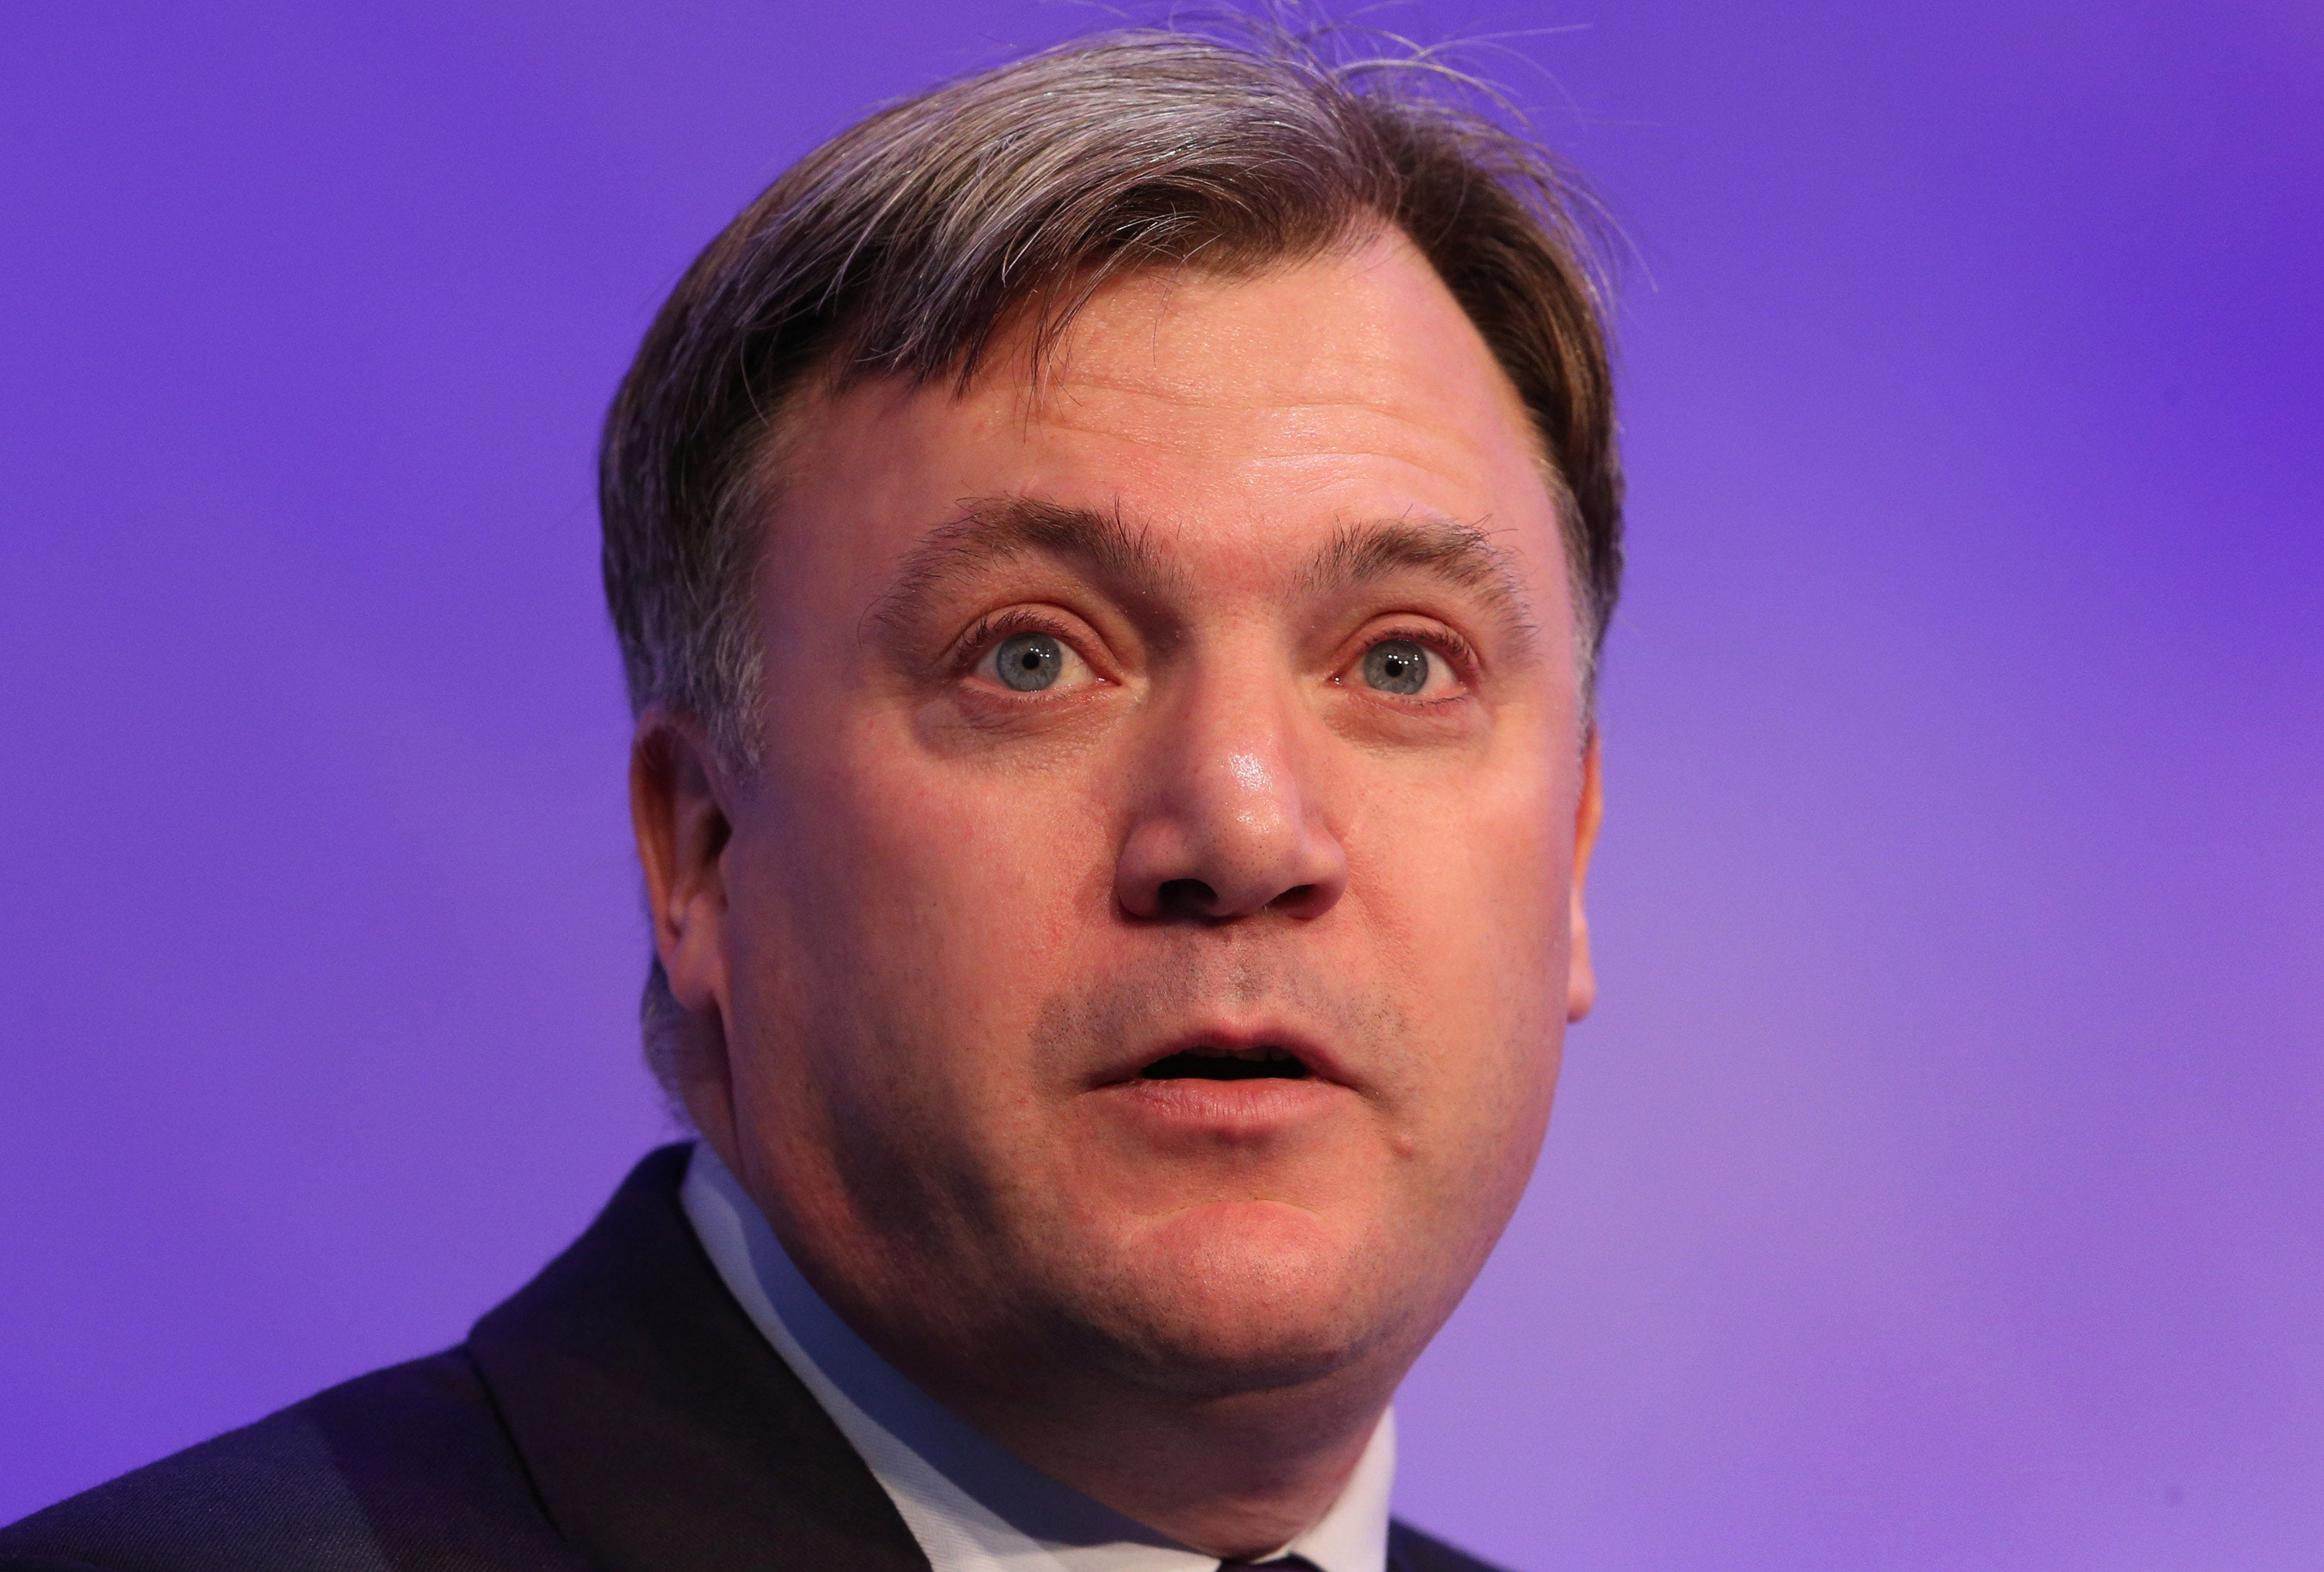 Ed Balls Went On A Sound Of Music Tour In Curtained